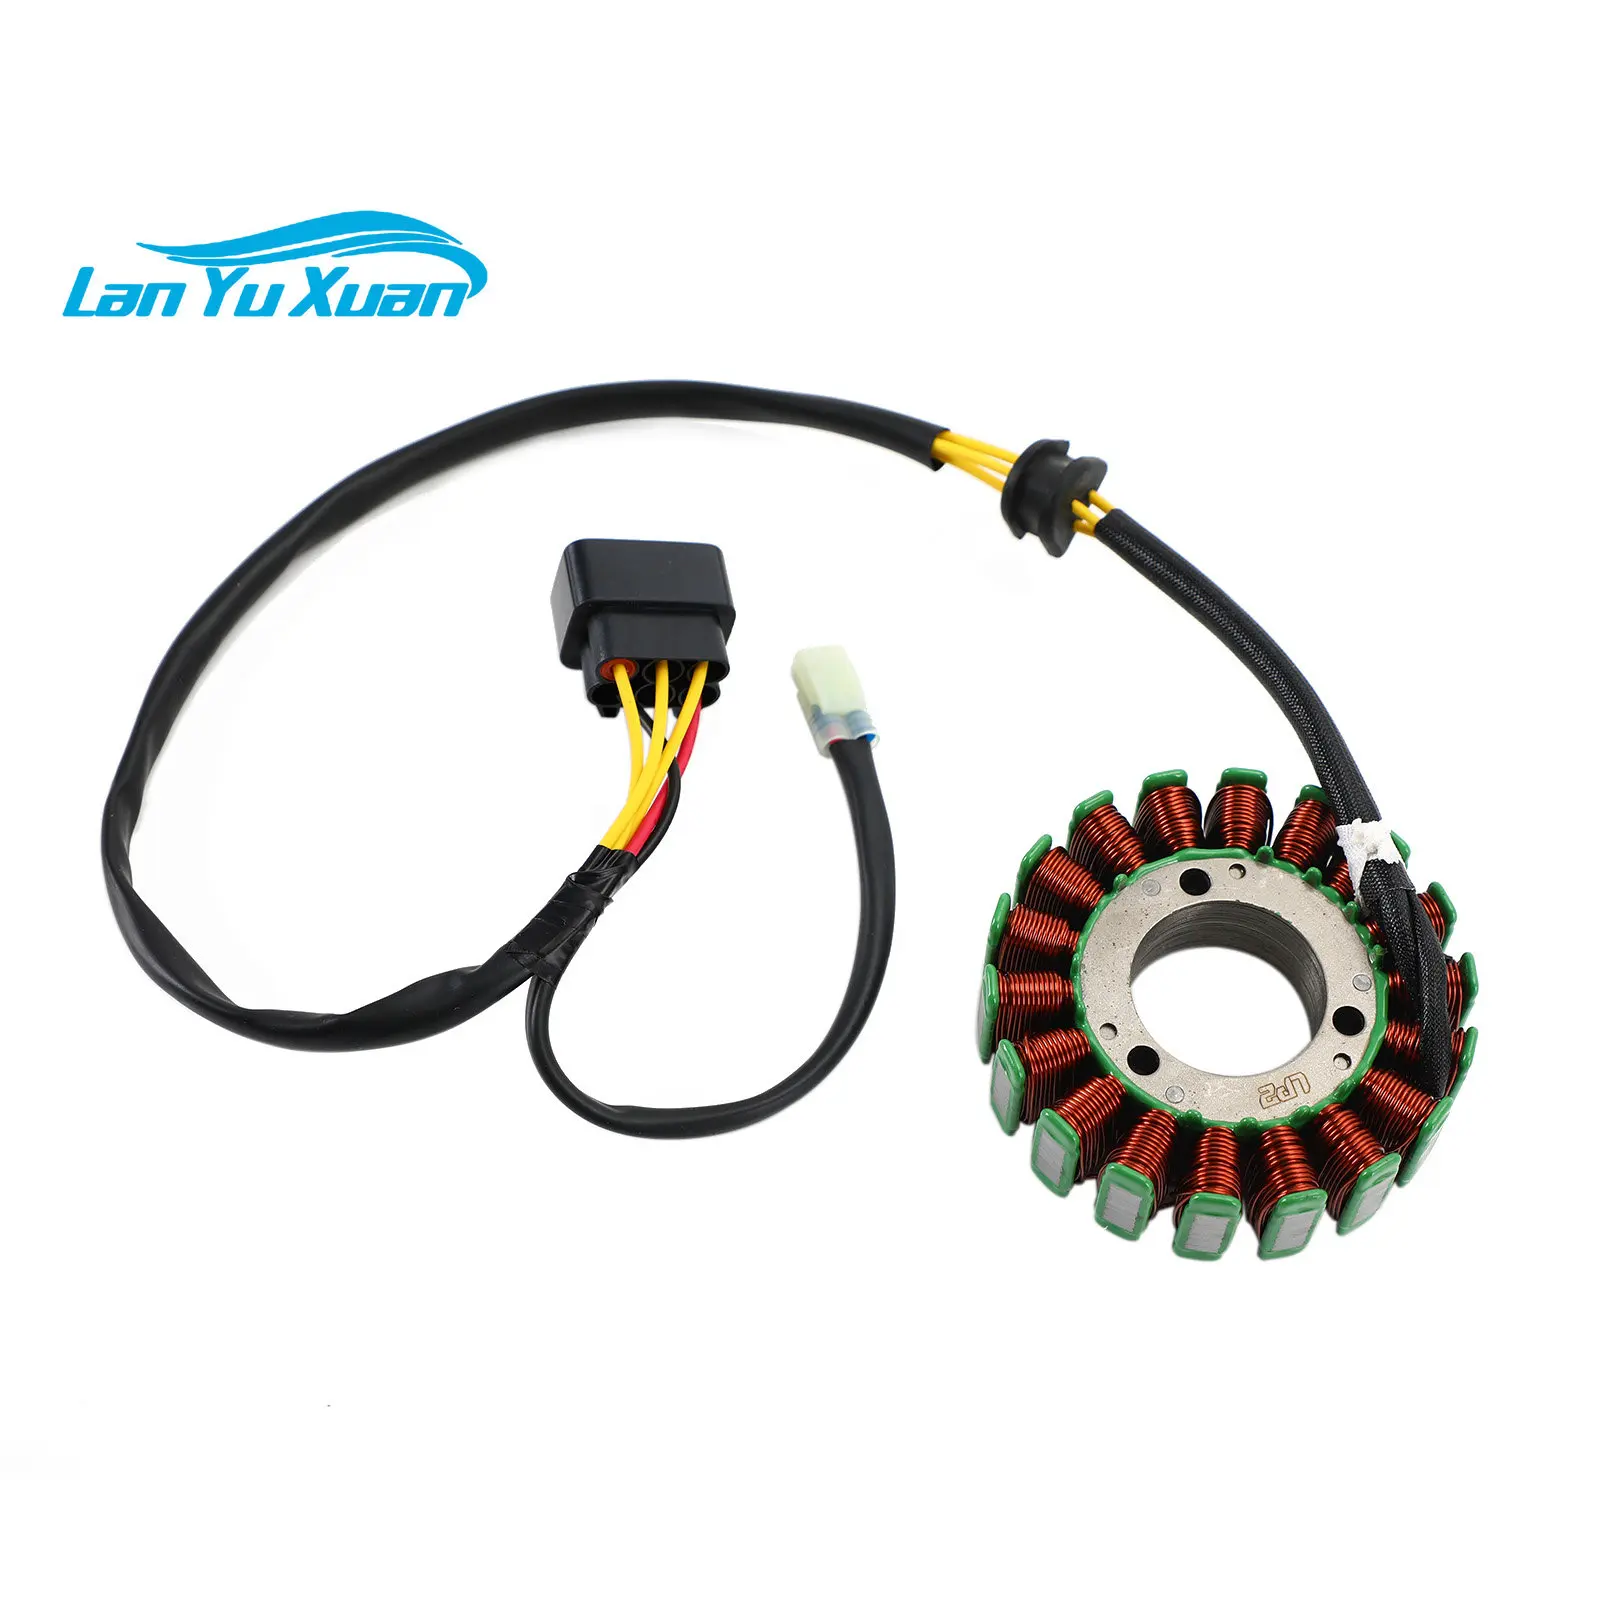 

Areyourshop Hight Quality F15551.02 Generator Stator For TM Racing EN MX 250 300 4-Temps 2012-2020 in Free Shipping